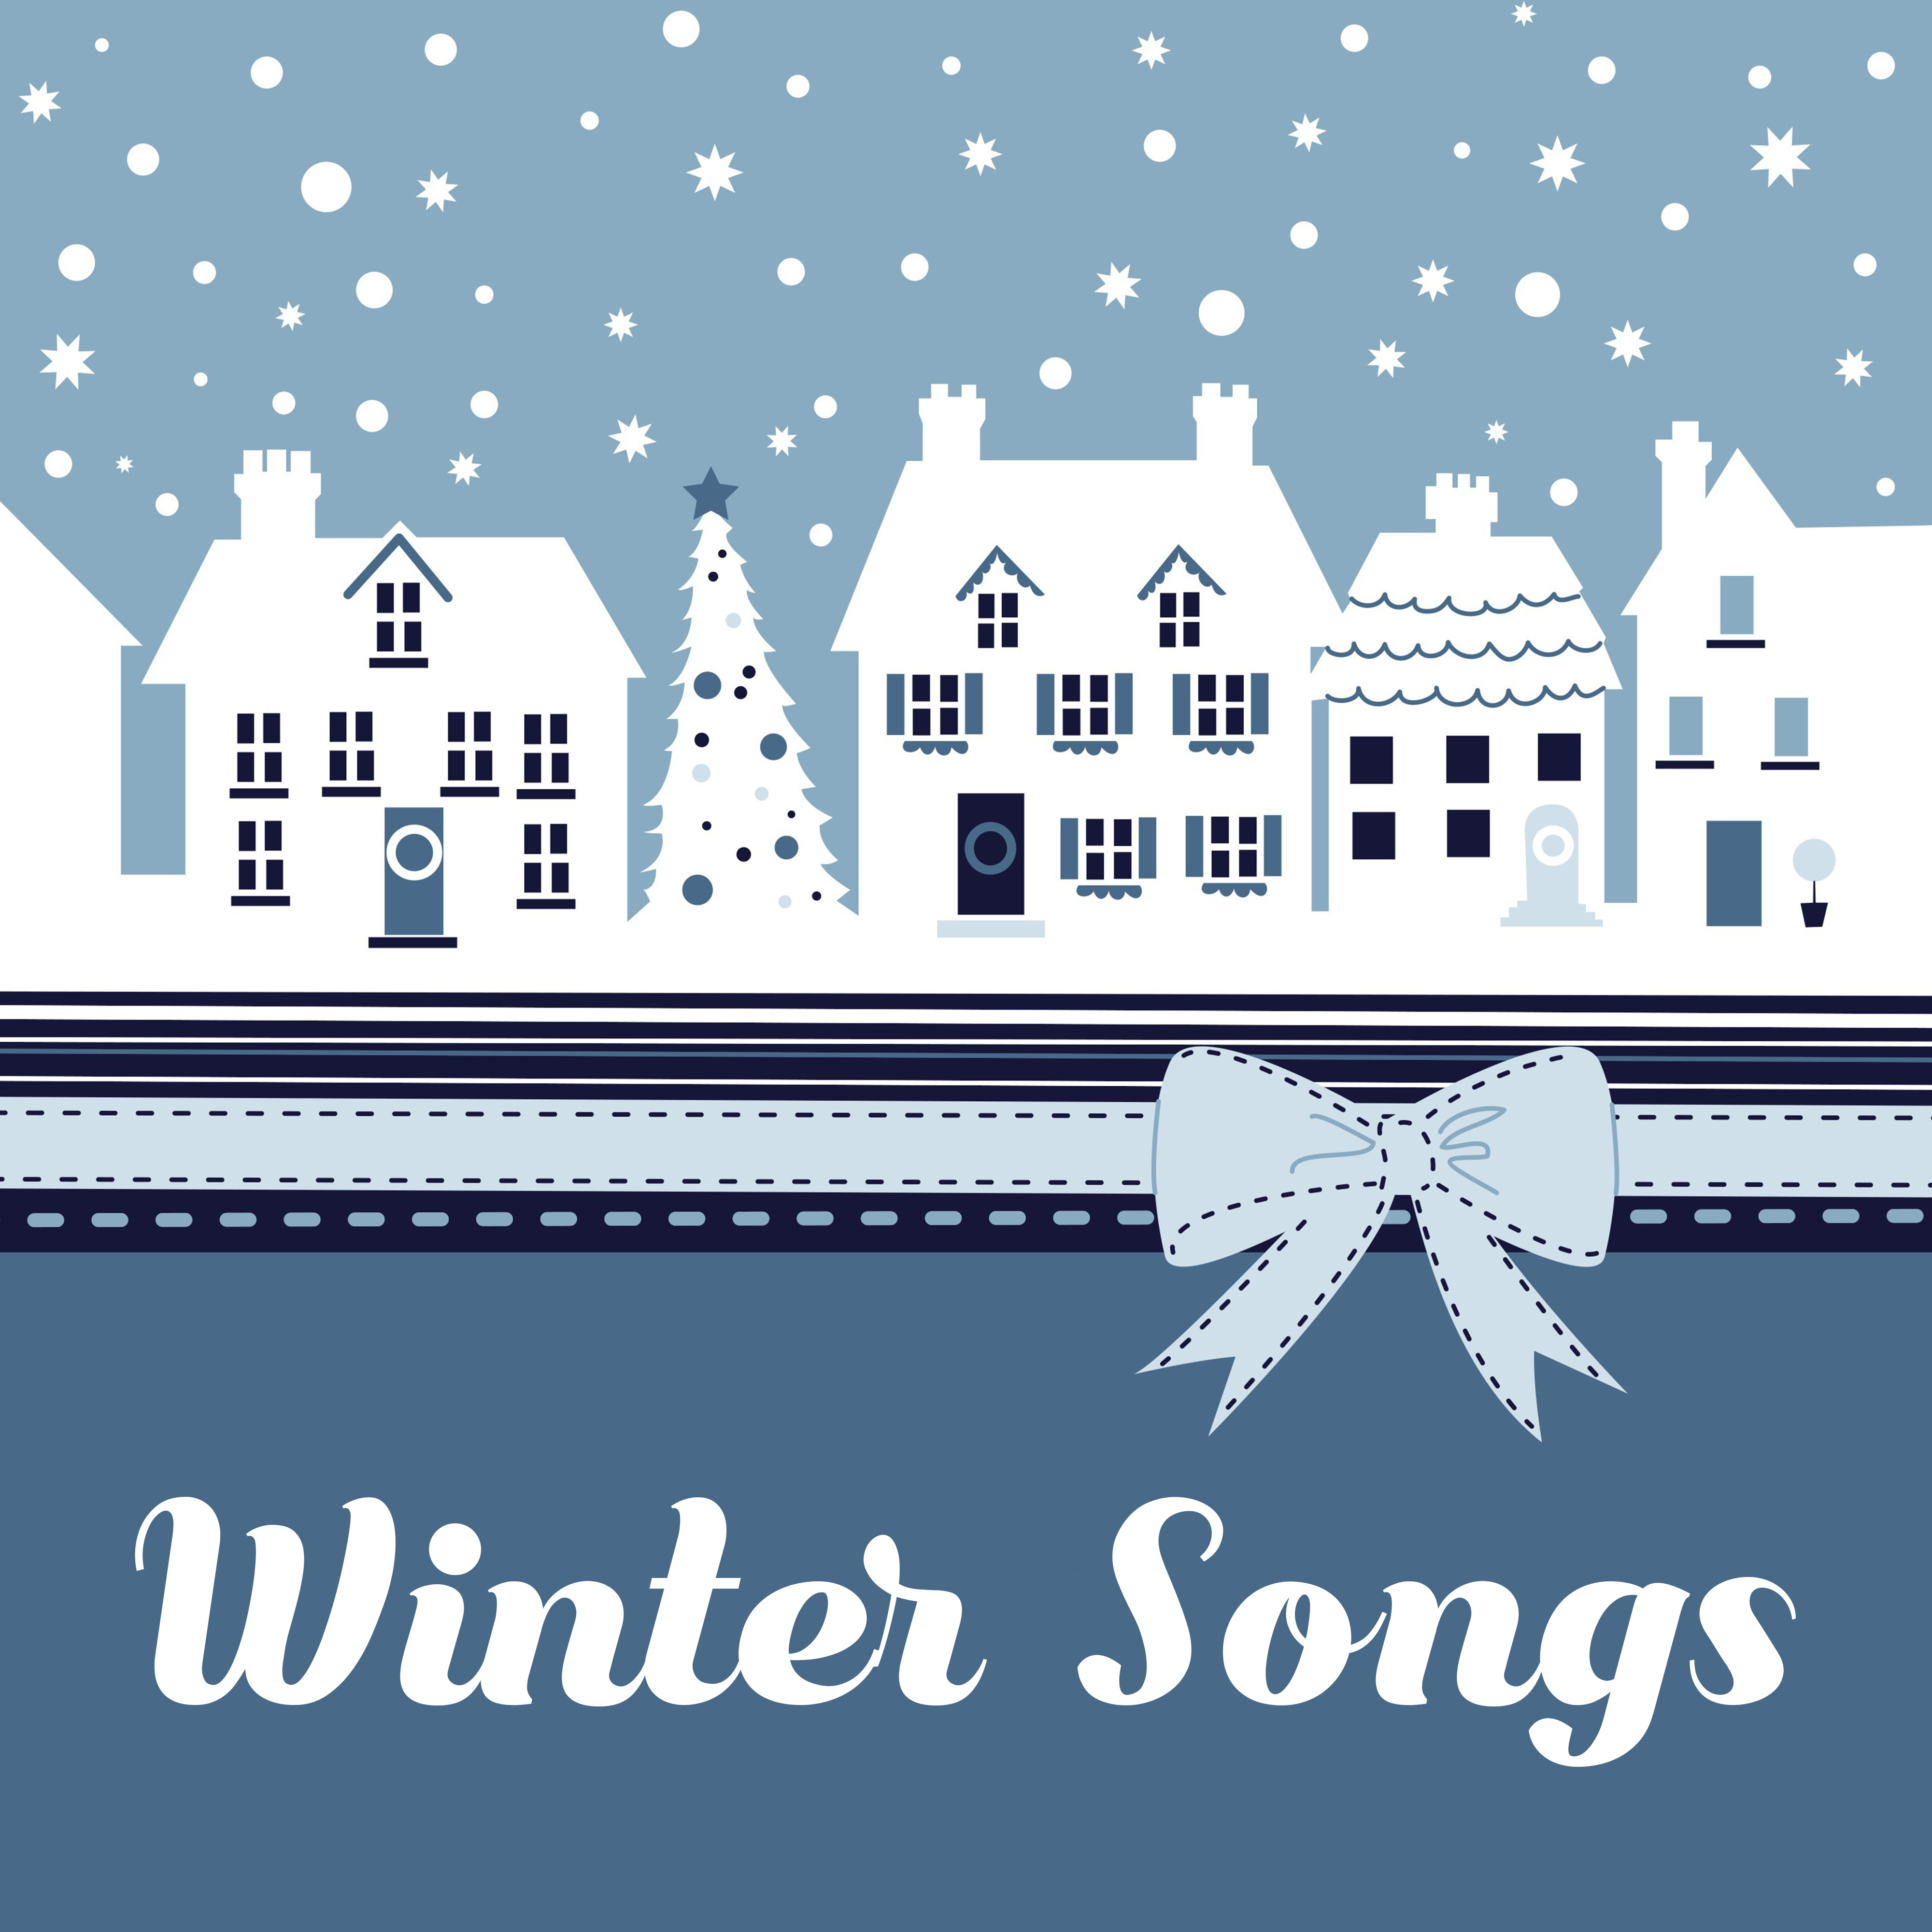 Winter Songs - Christmas Songs, Kisses under Mistletoe, Time Gifts, Family Moments, Aroma of Mulled Wine, Gingerbread, Cookies for Claus, Snow White, Dazzling Snowflakes, Snowman and Angels